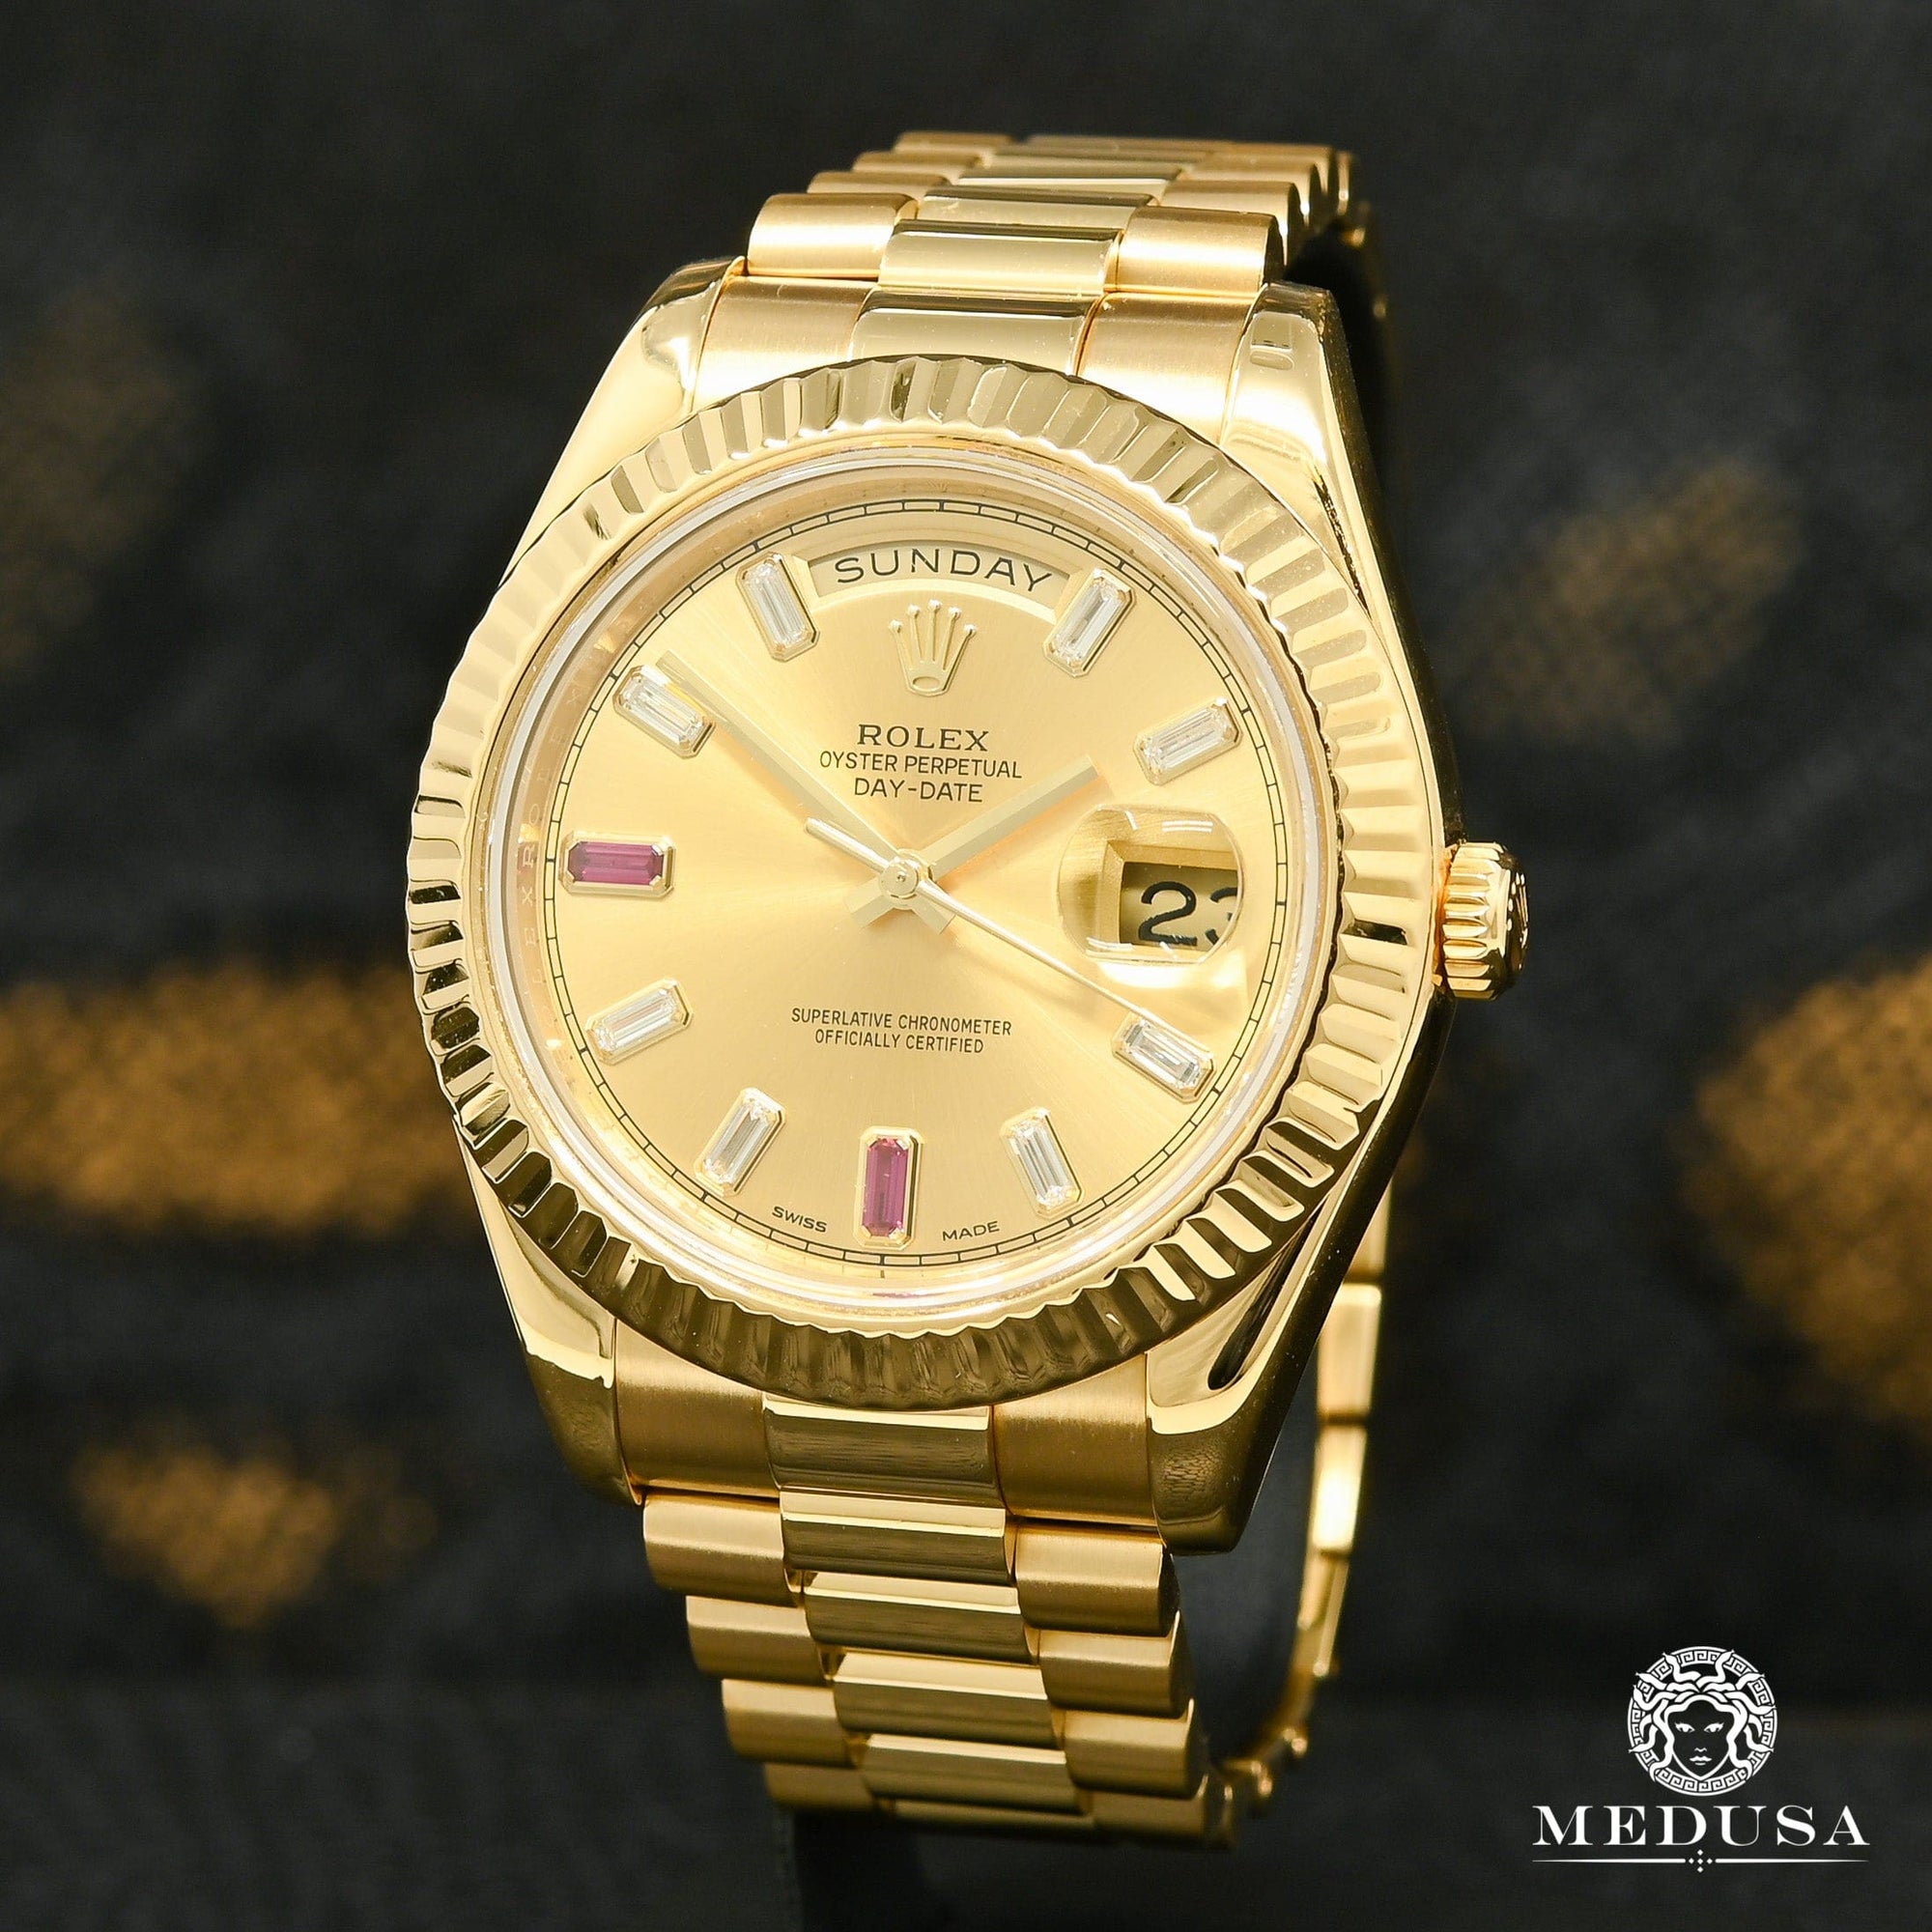 Montre Rolex | Homme President Day-Date 41mm - Factory Rubis Or Jaune